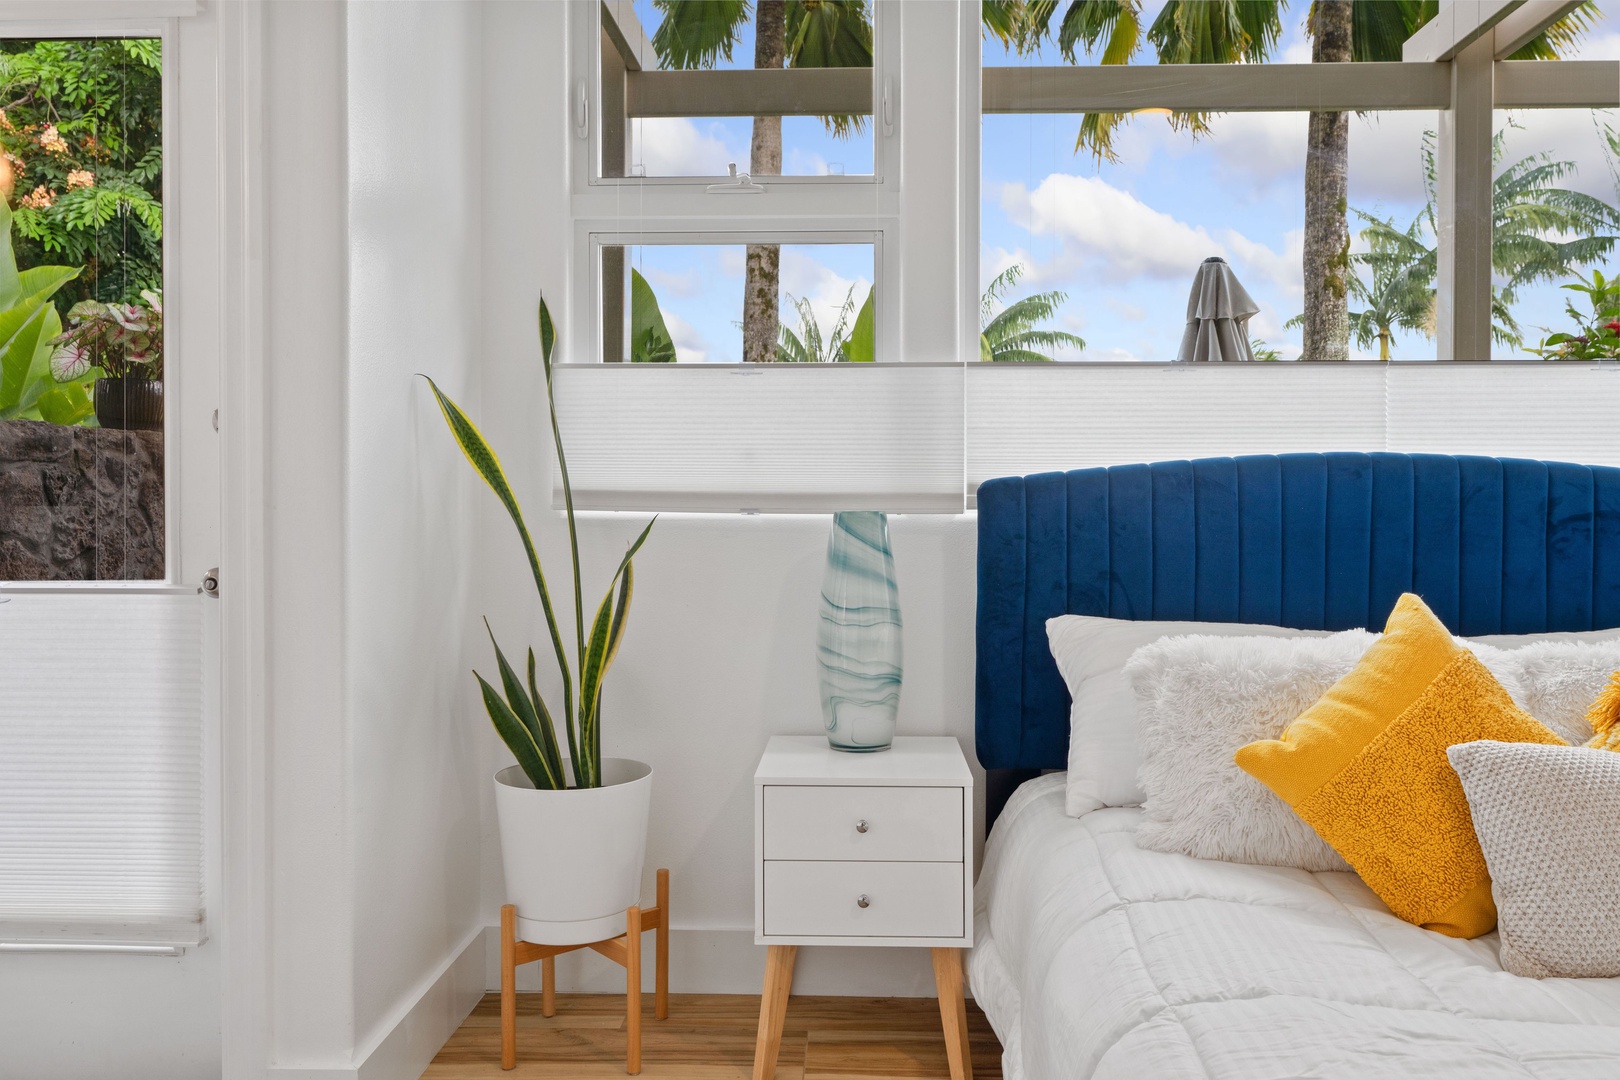 Princeville Vacation Rentals, Tropical Elegance - A calm bedroom corner featuring a modern white nightstand with two drawers.